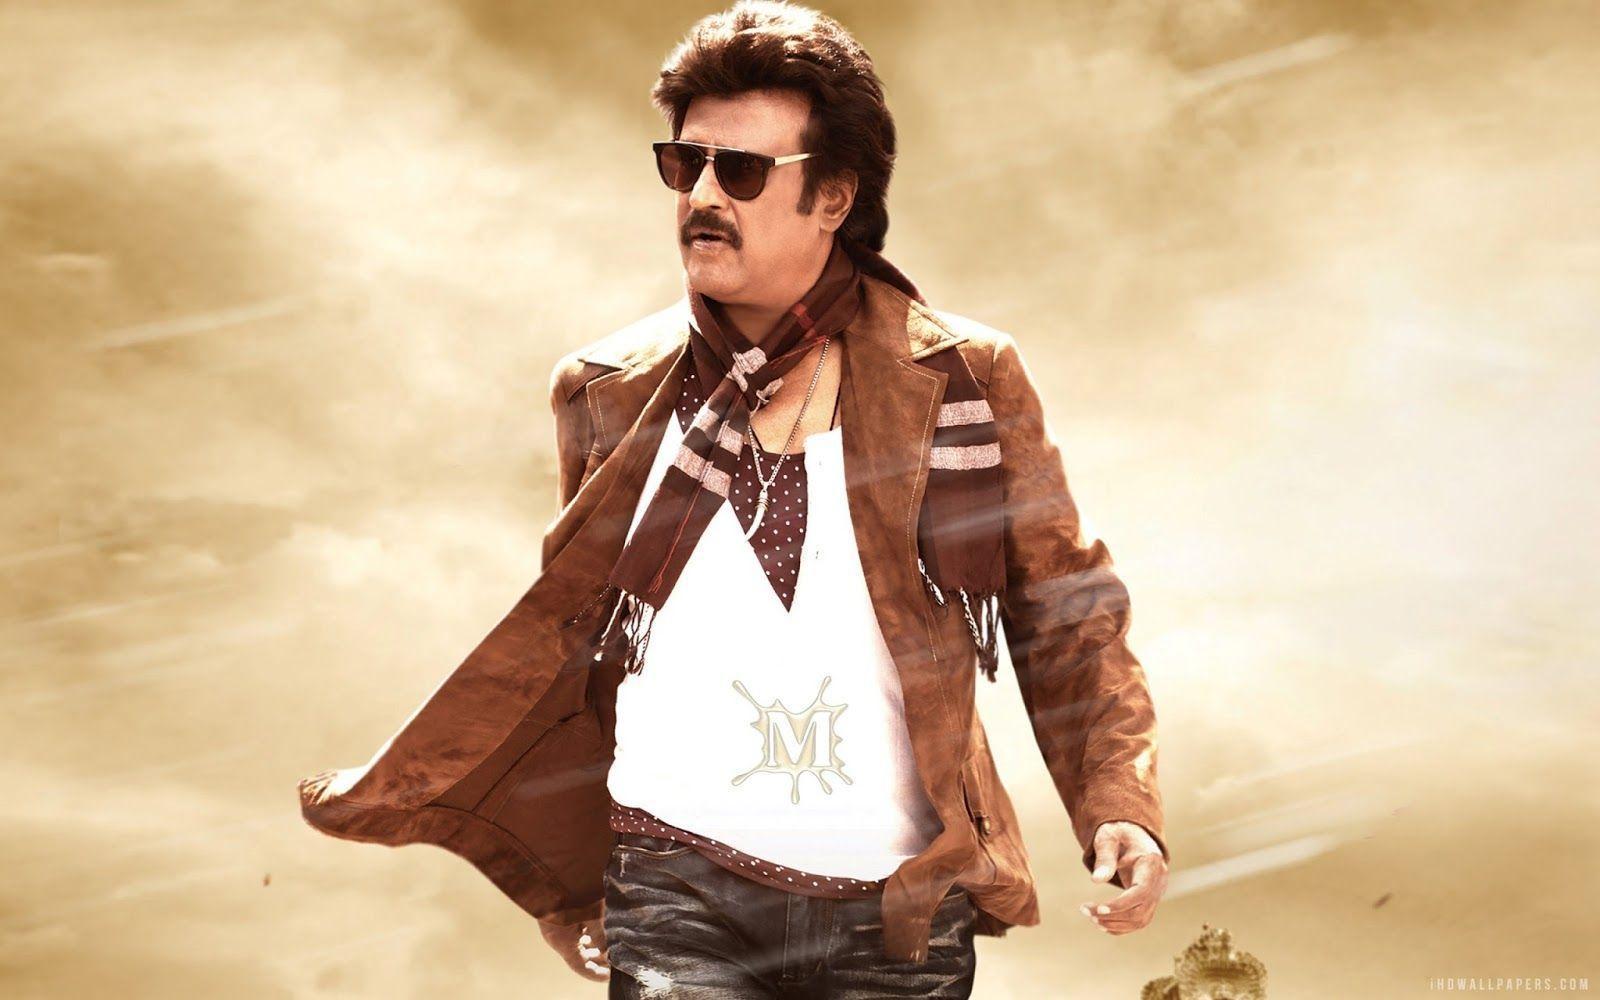 Rajinikanth All Upcoming Movies List 2017 With Release Dates